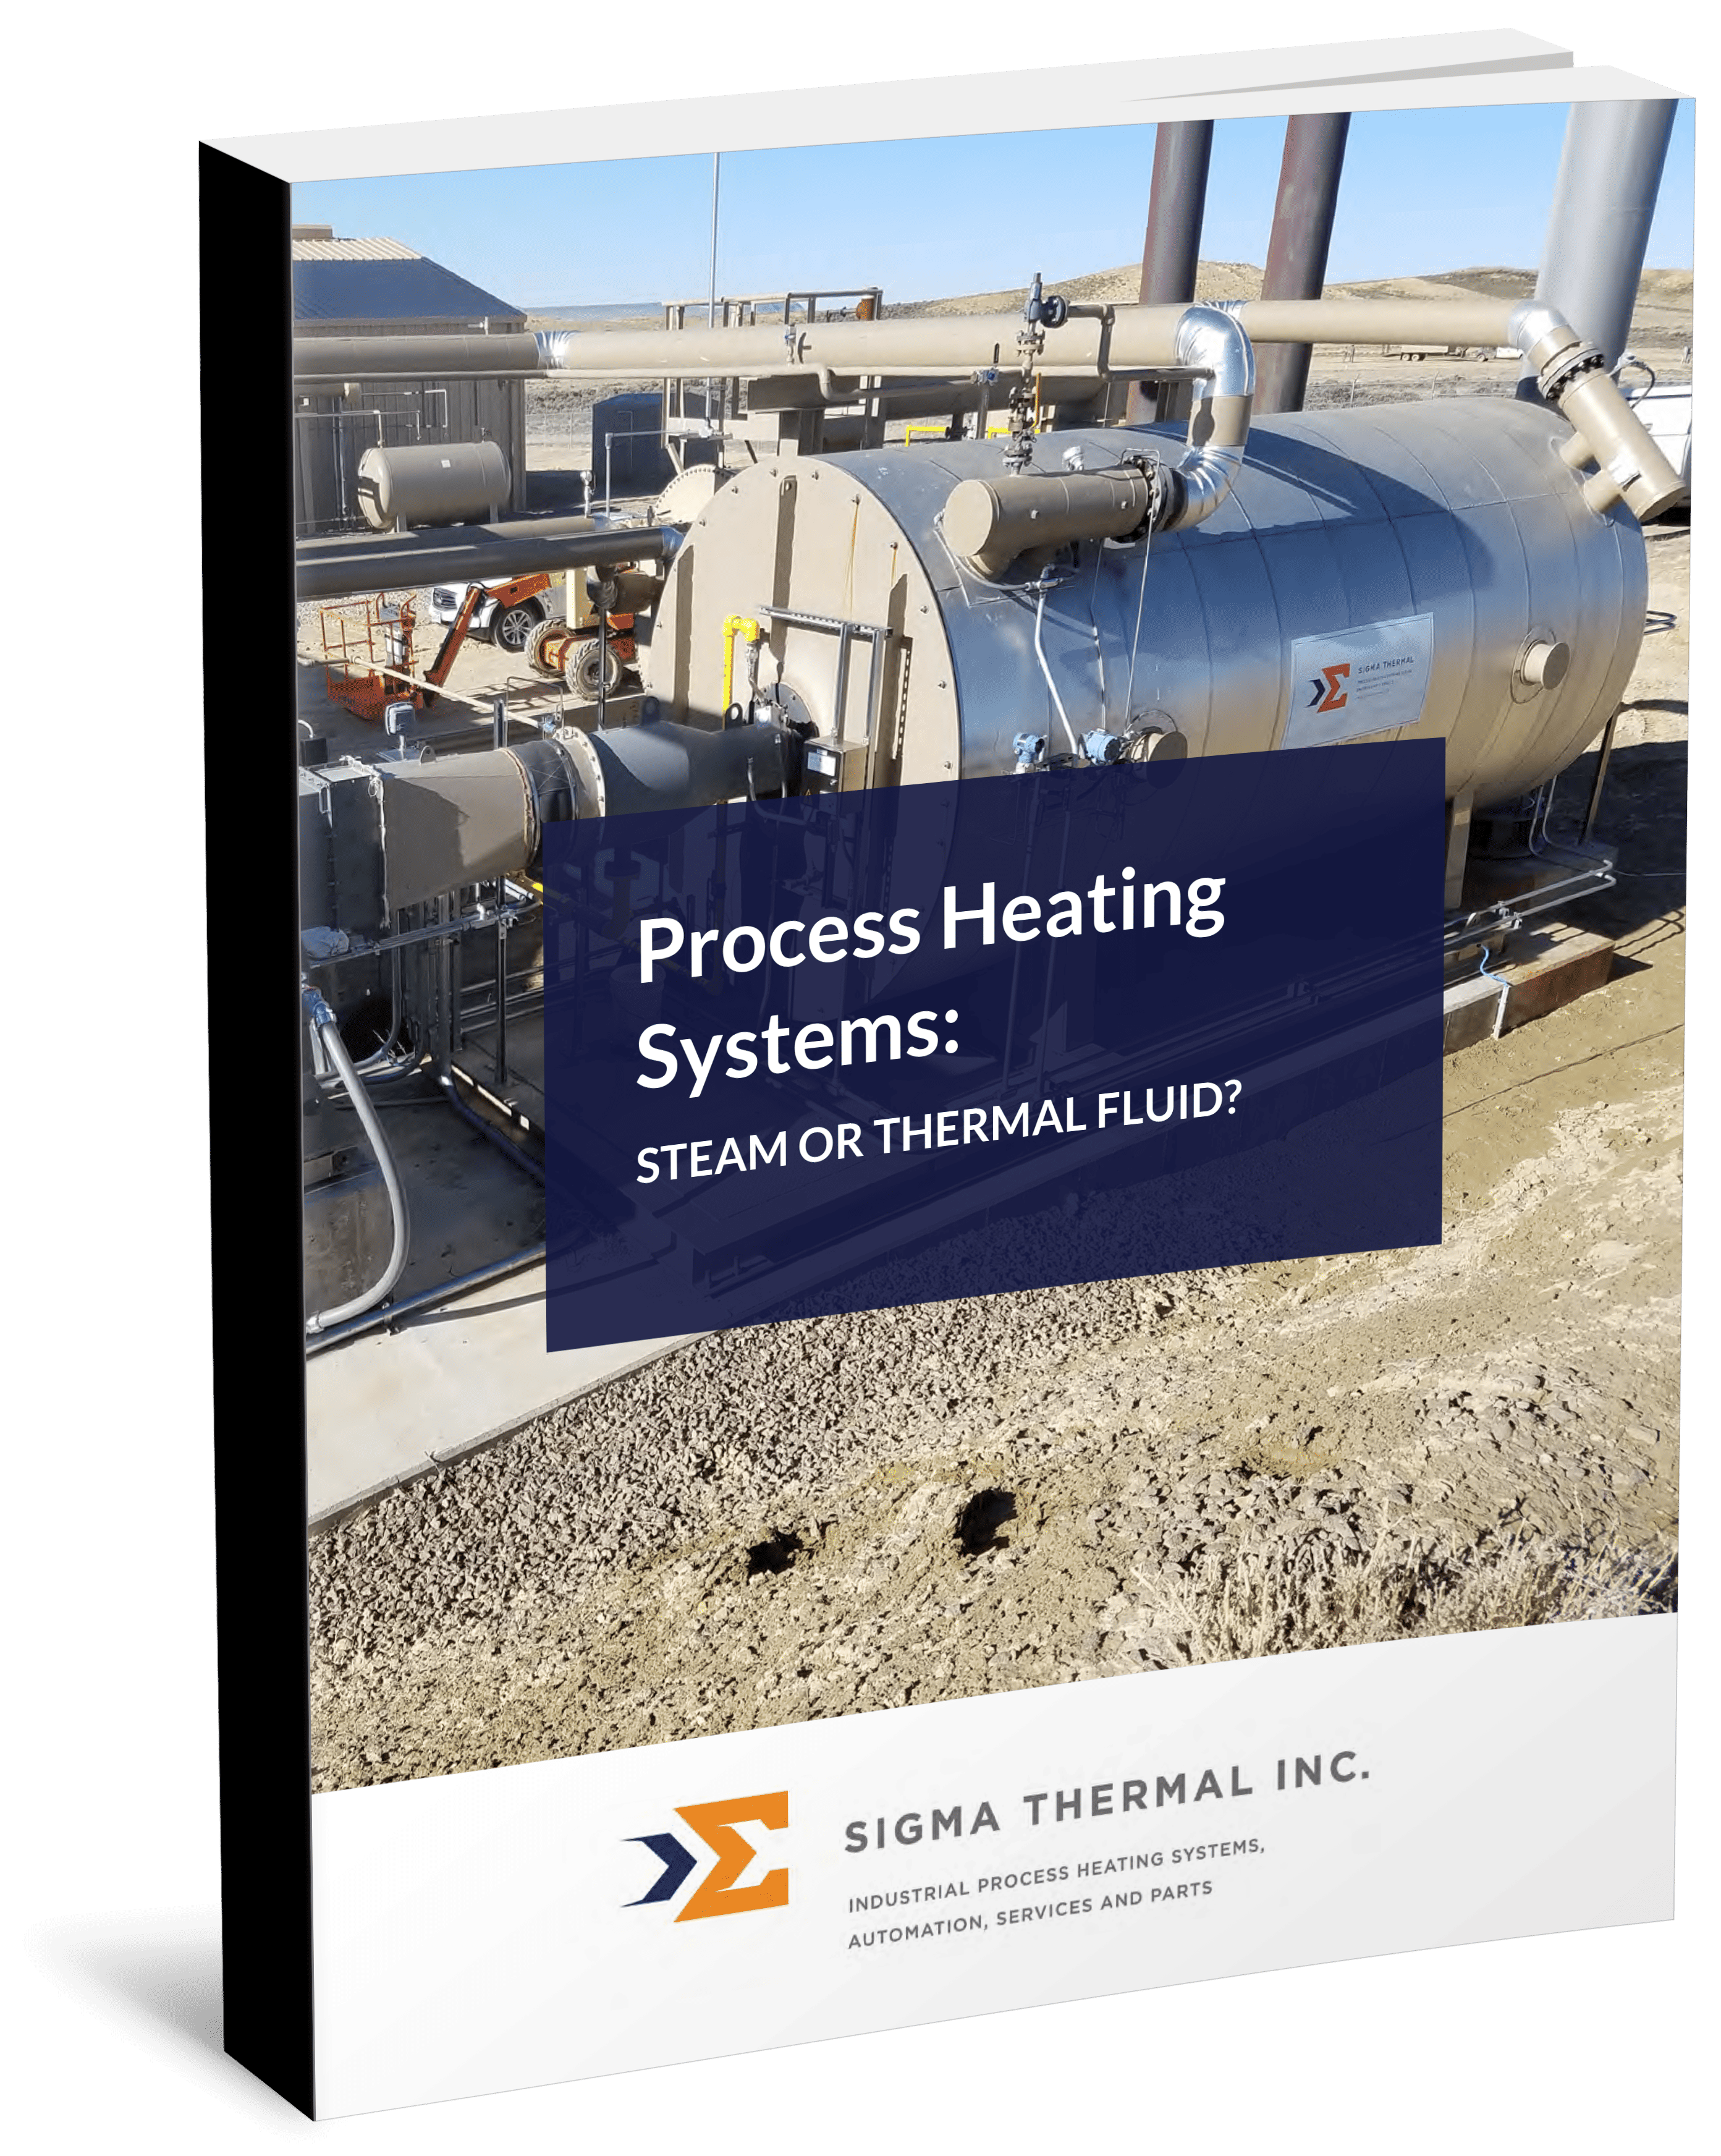 Process Heating Systems: Steam or Thermal Fluid?